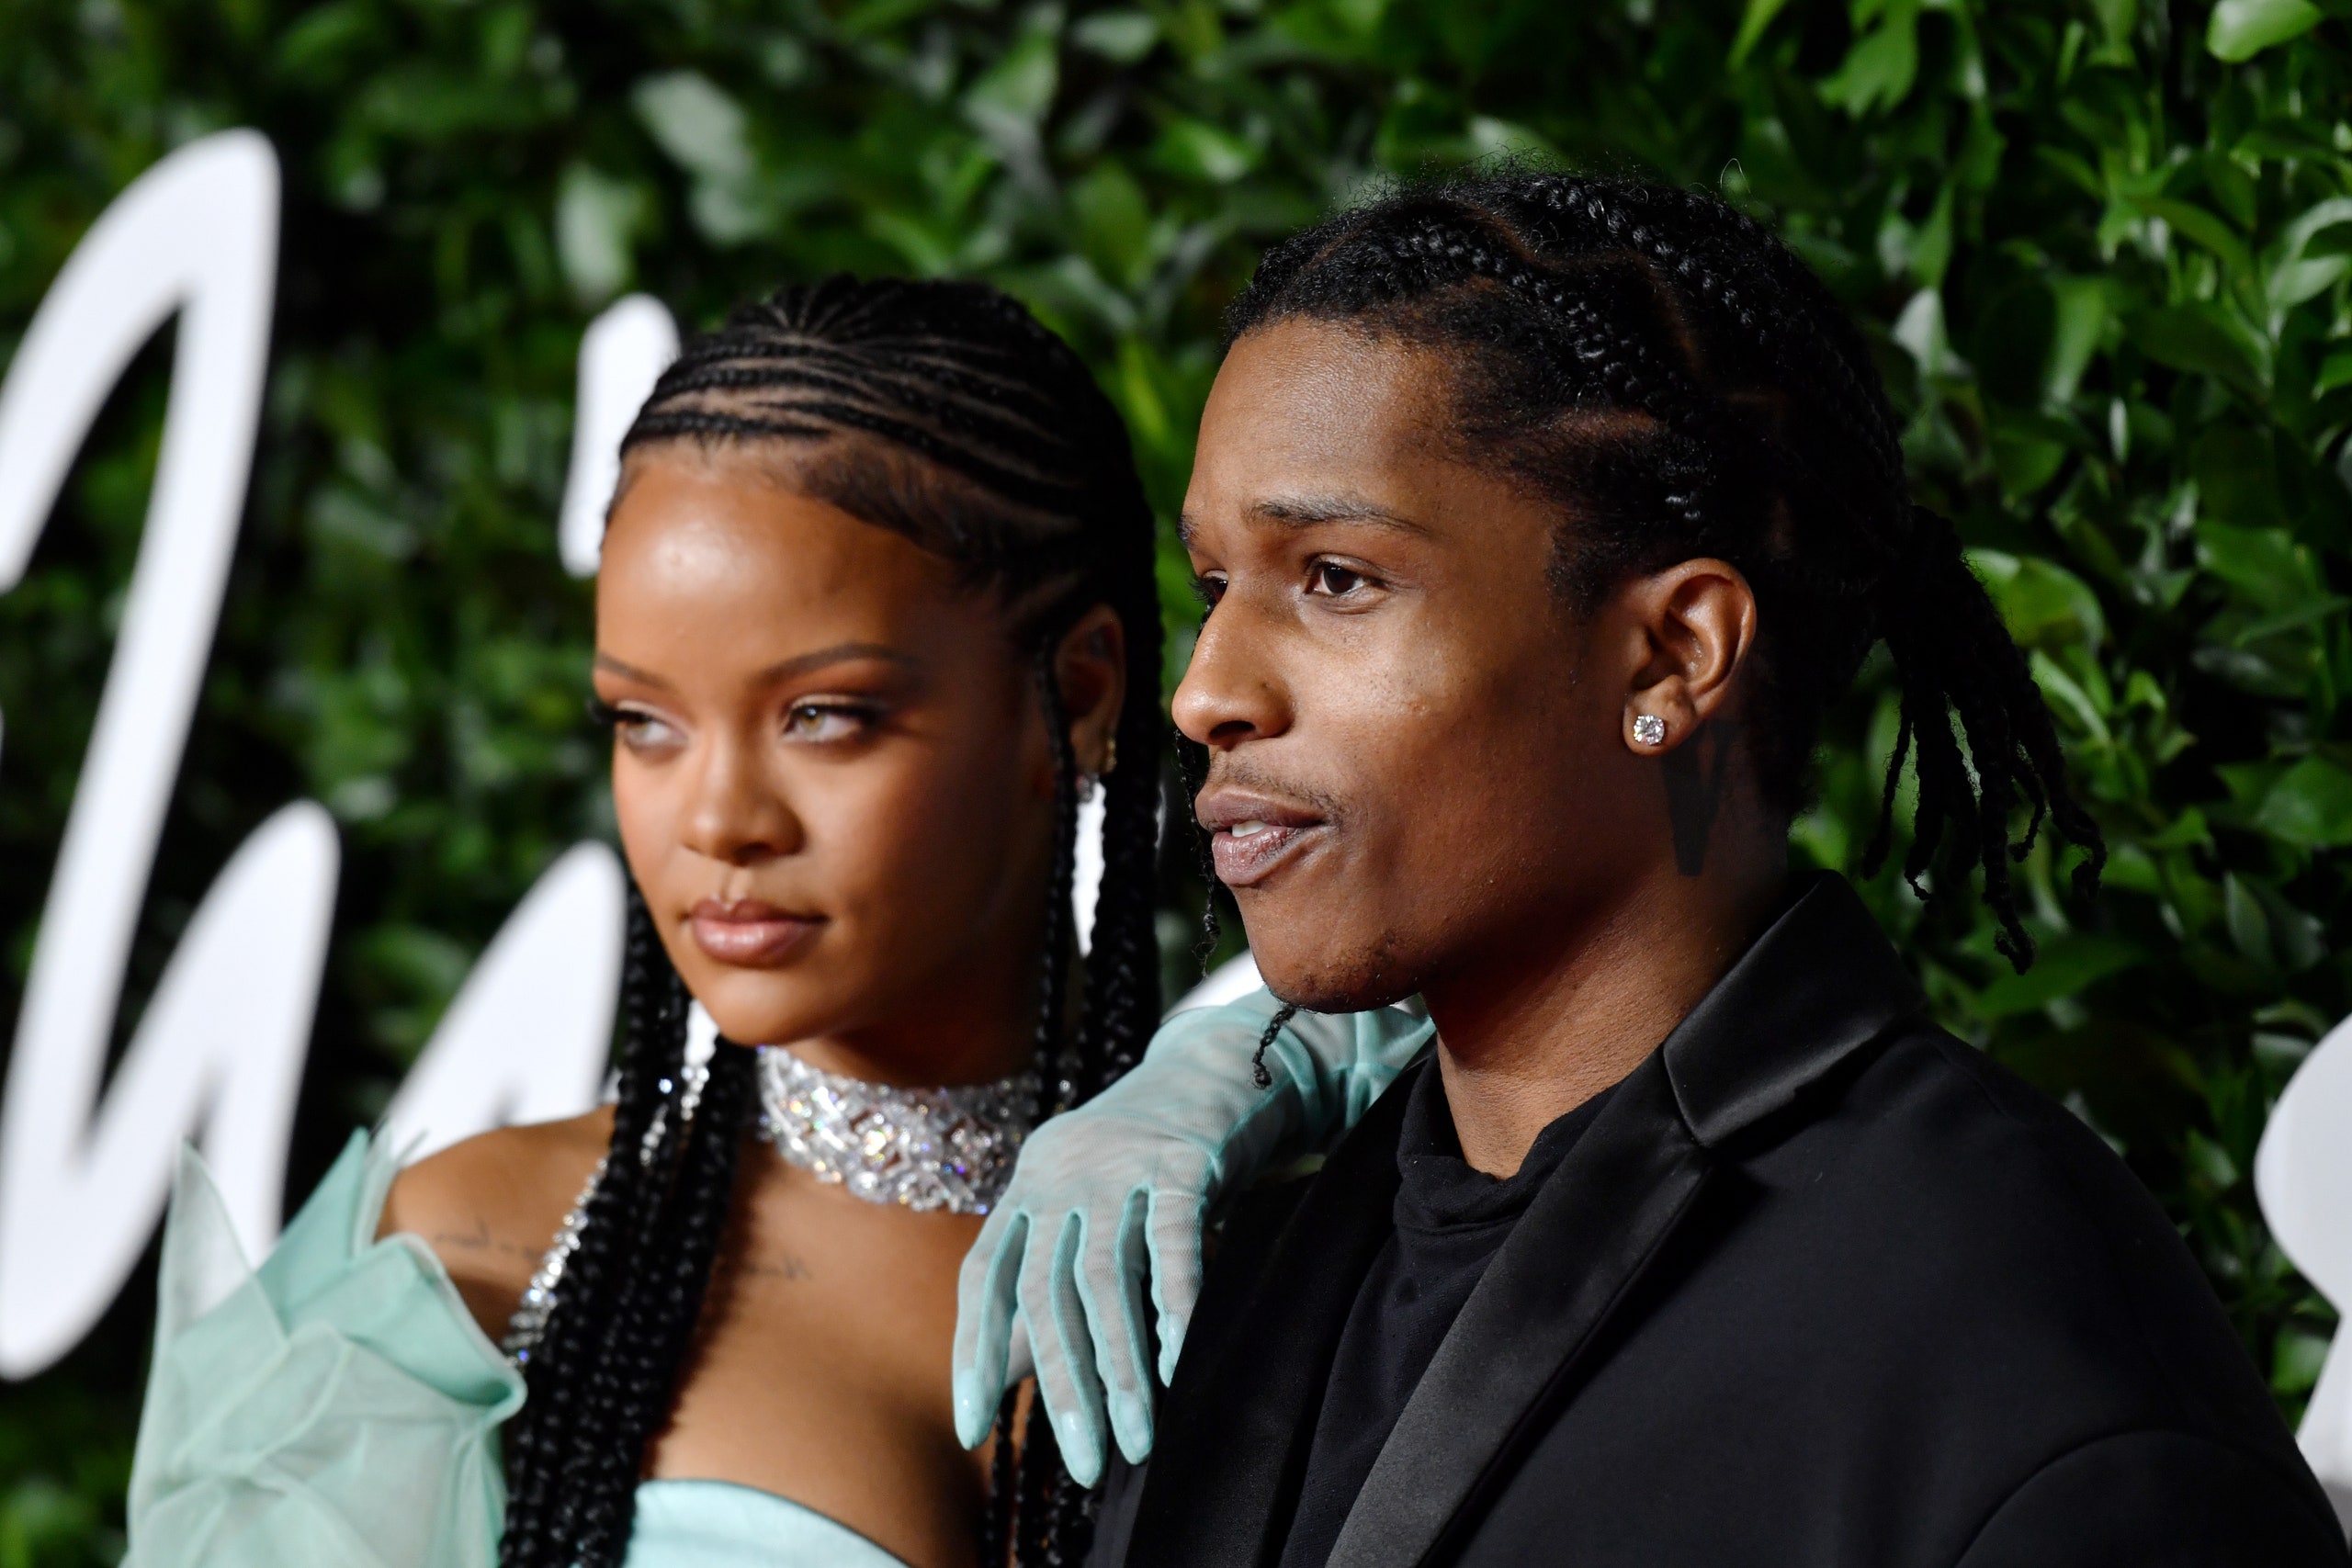 A$AP Rocky Confirms Relationship With Rihanna: “She’s The One”